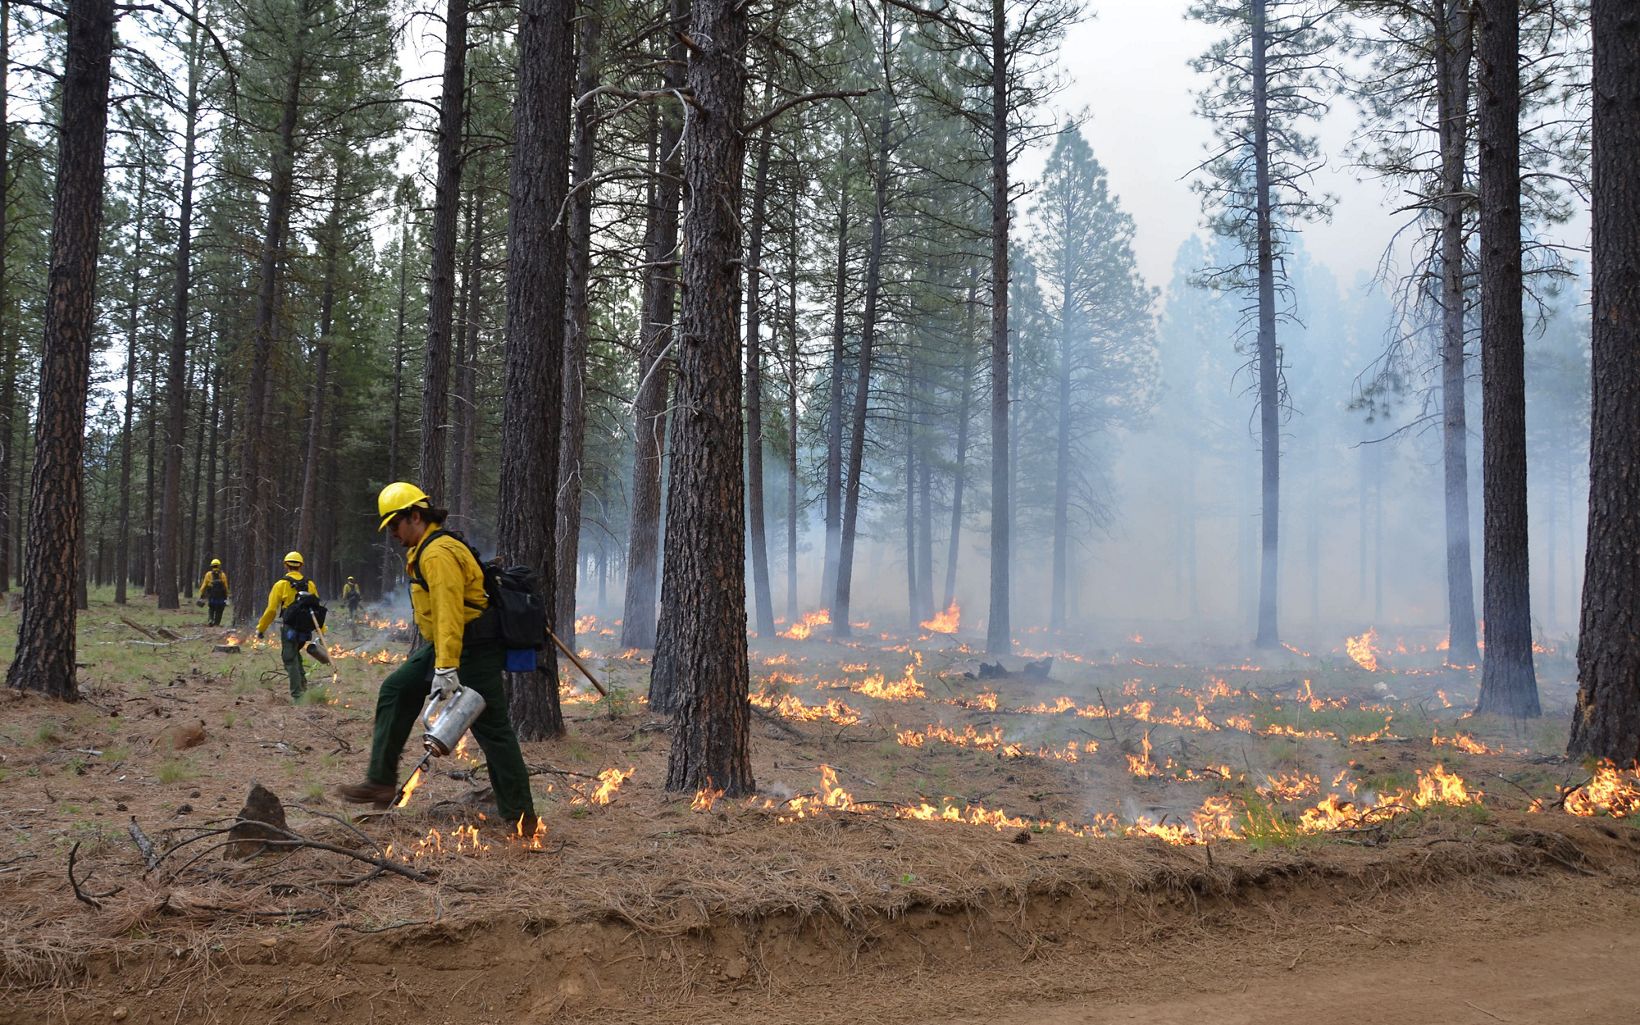 
                
                  Conducted by Professionals Certified and experienced fire professionals conduct controlled burns to maximize safety.
                  © Jason Houston
                
              